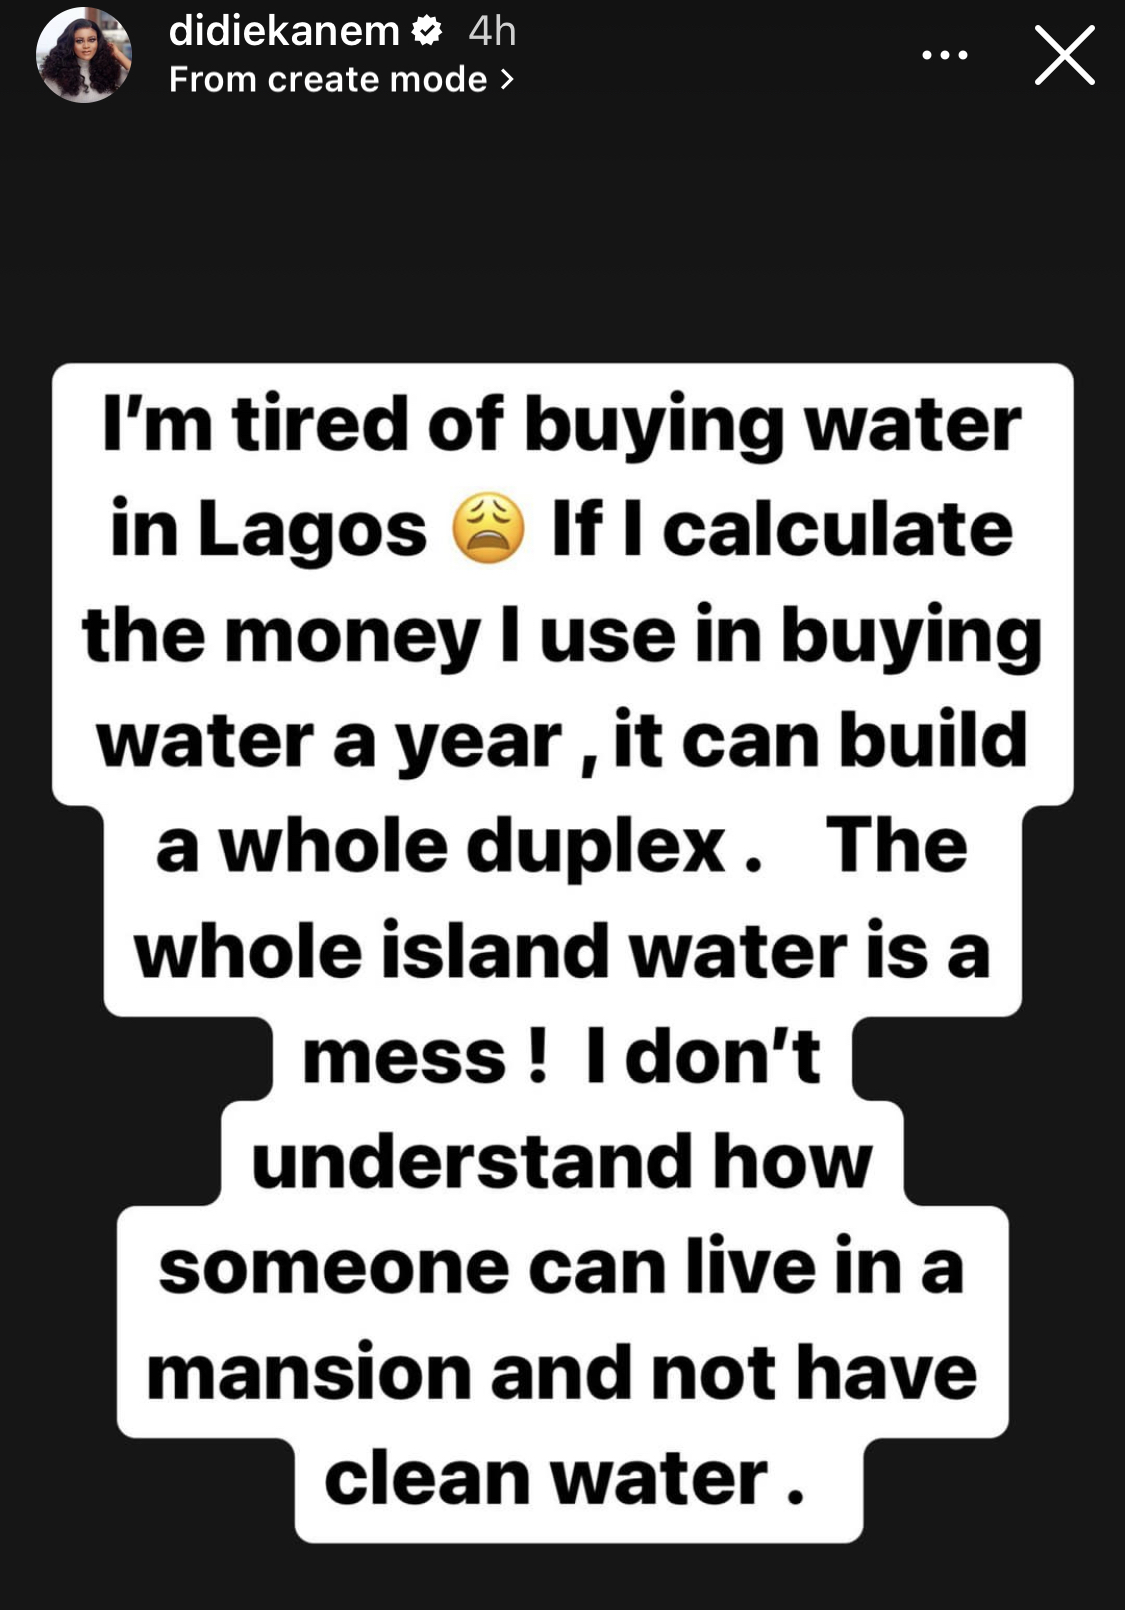 The money I use to buy water in a year can build a duplex - Actress Didi Ekanem cries out